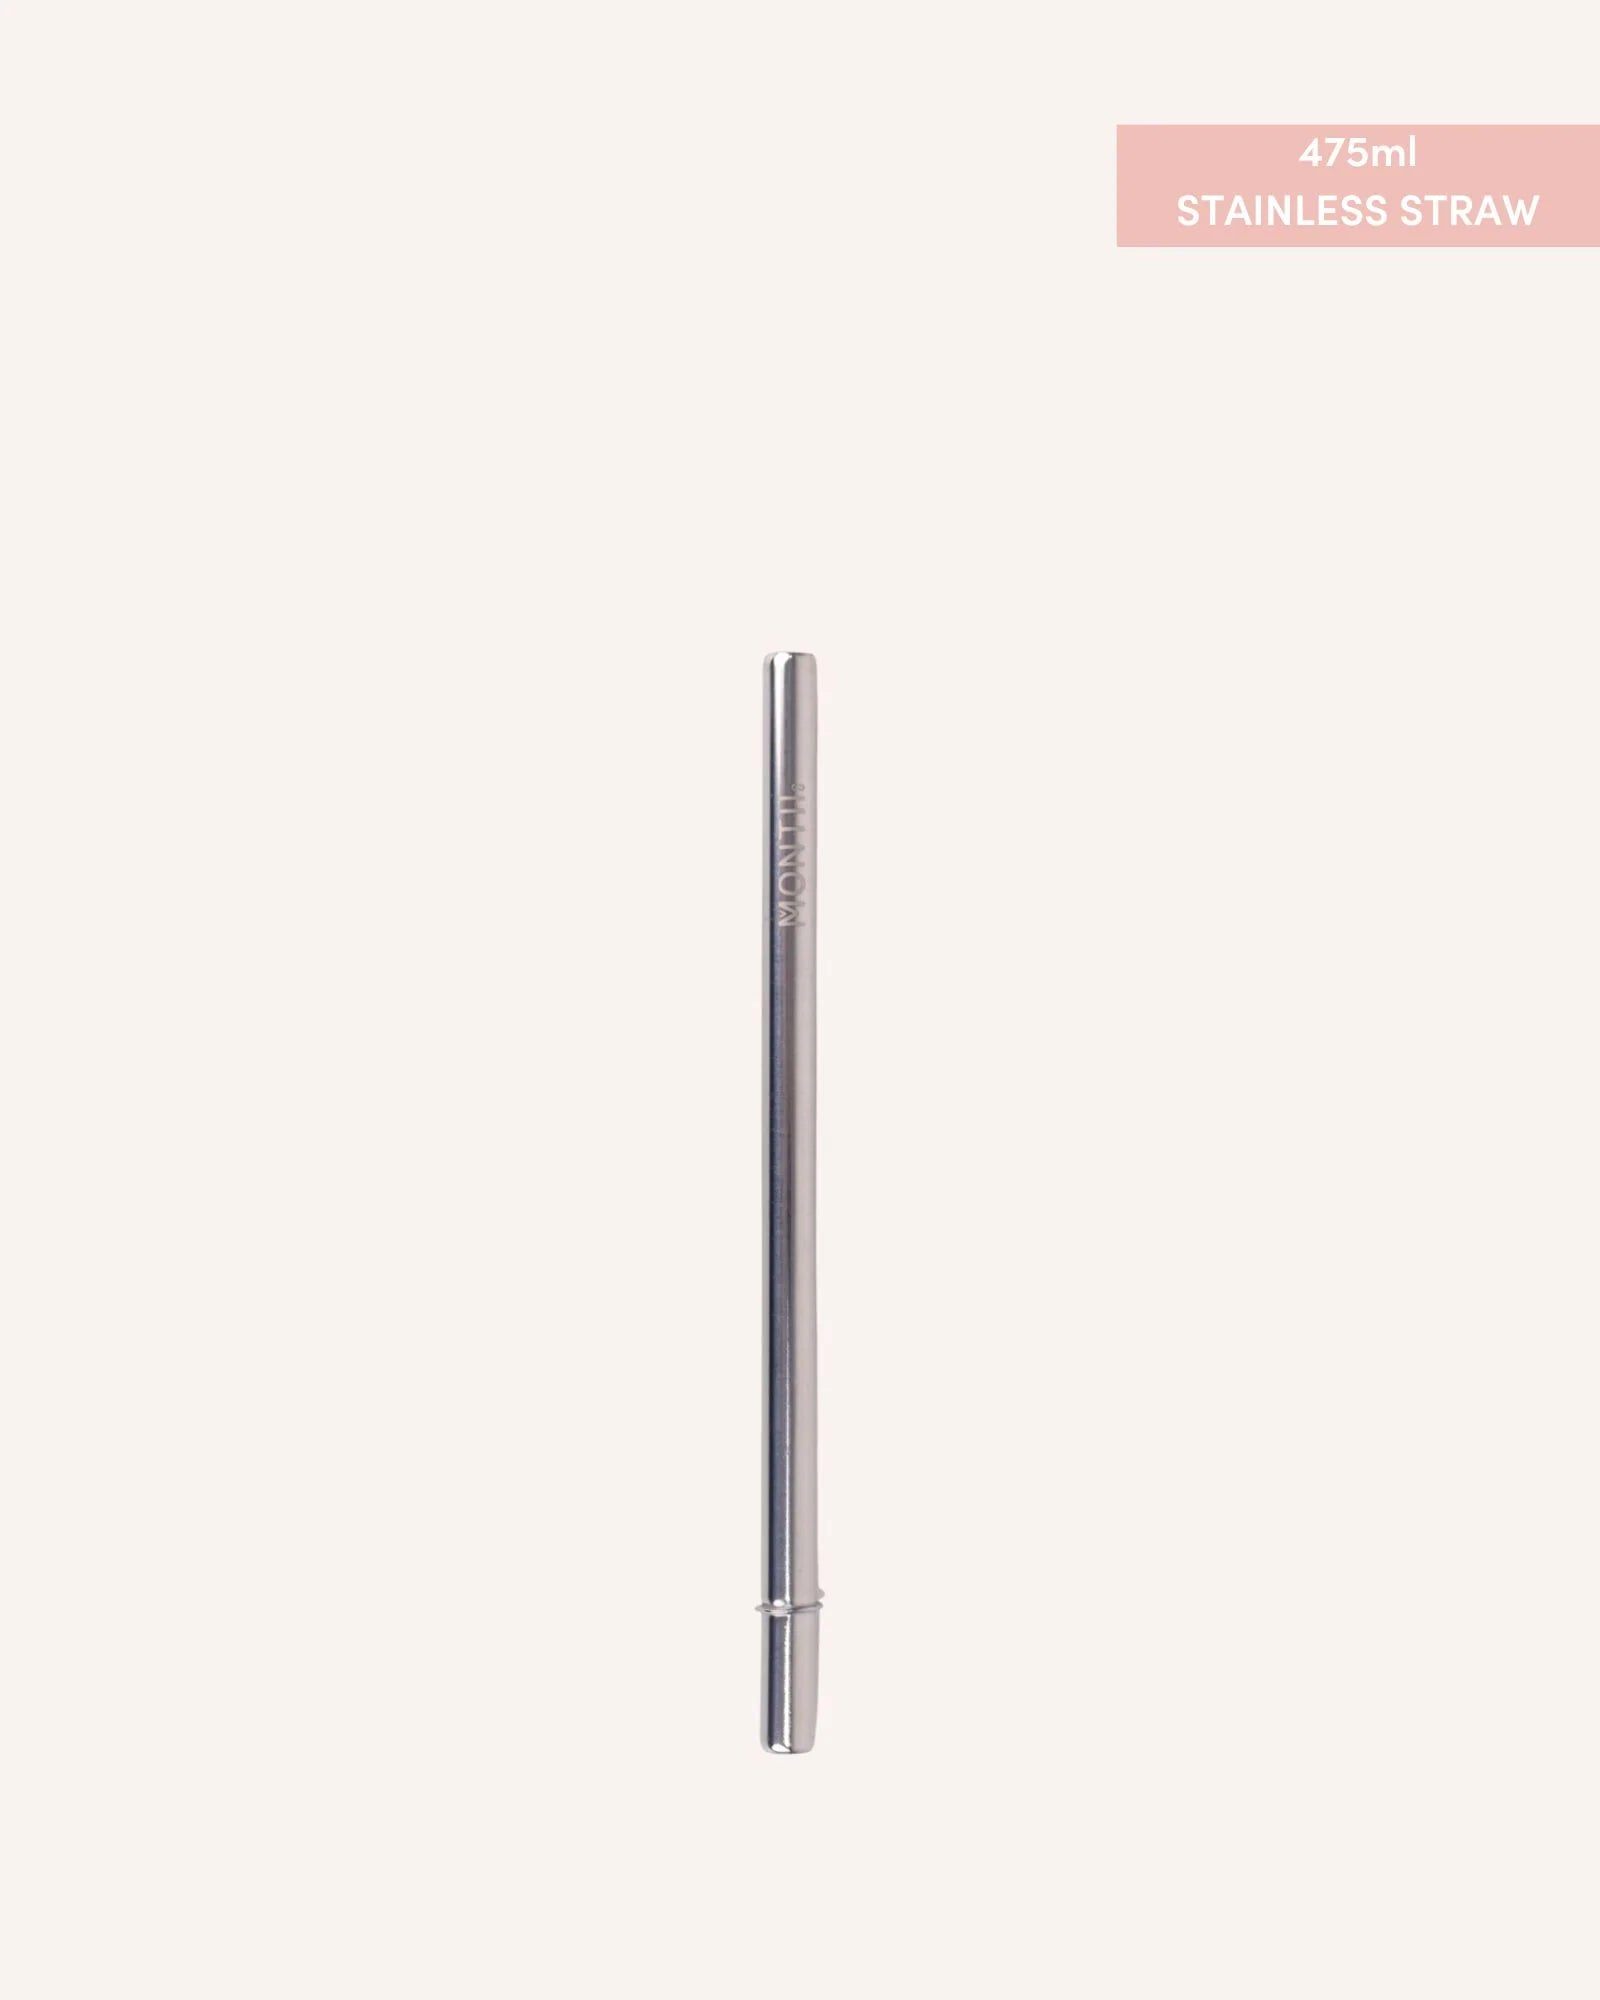 FUSION Stainless Smoothie Straw